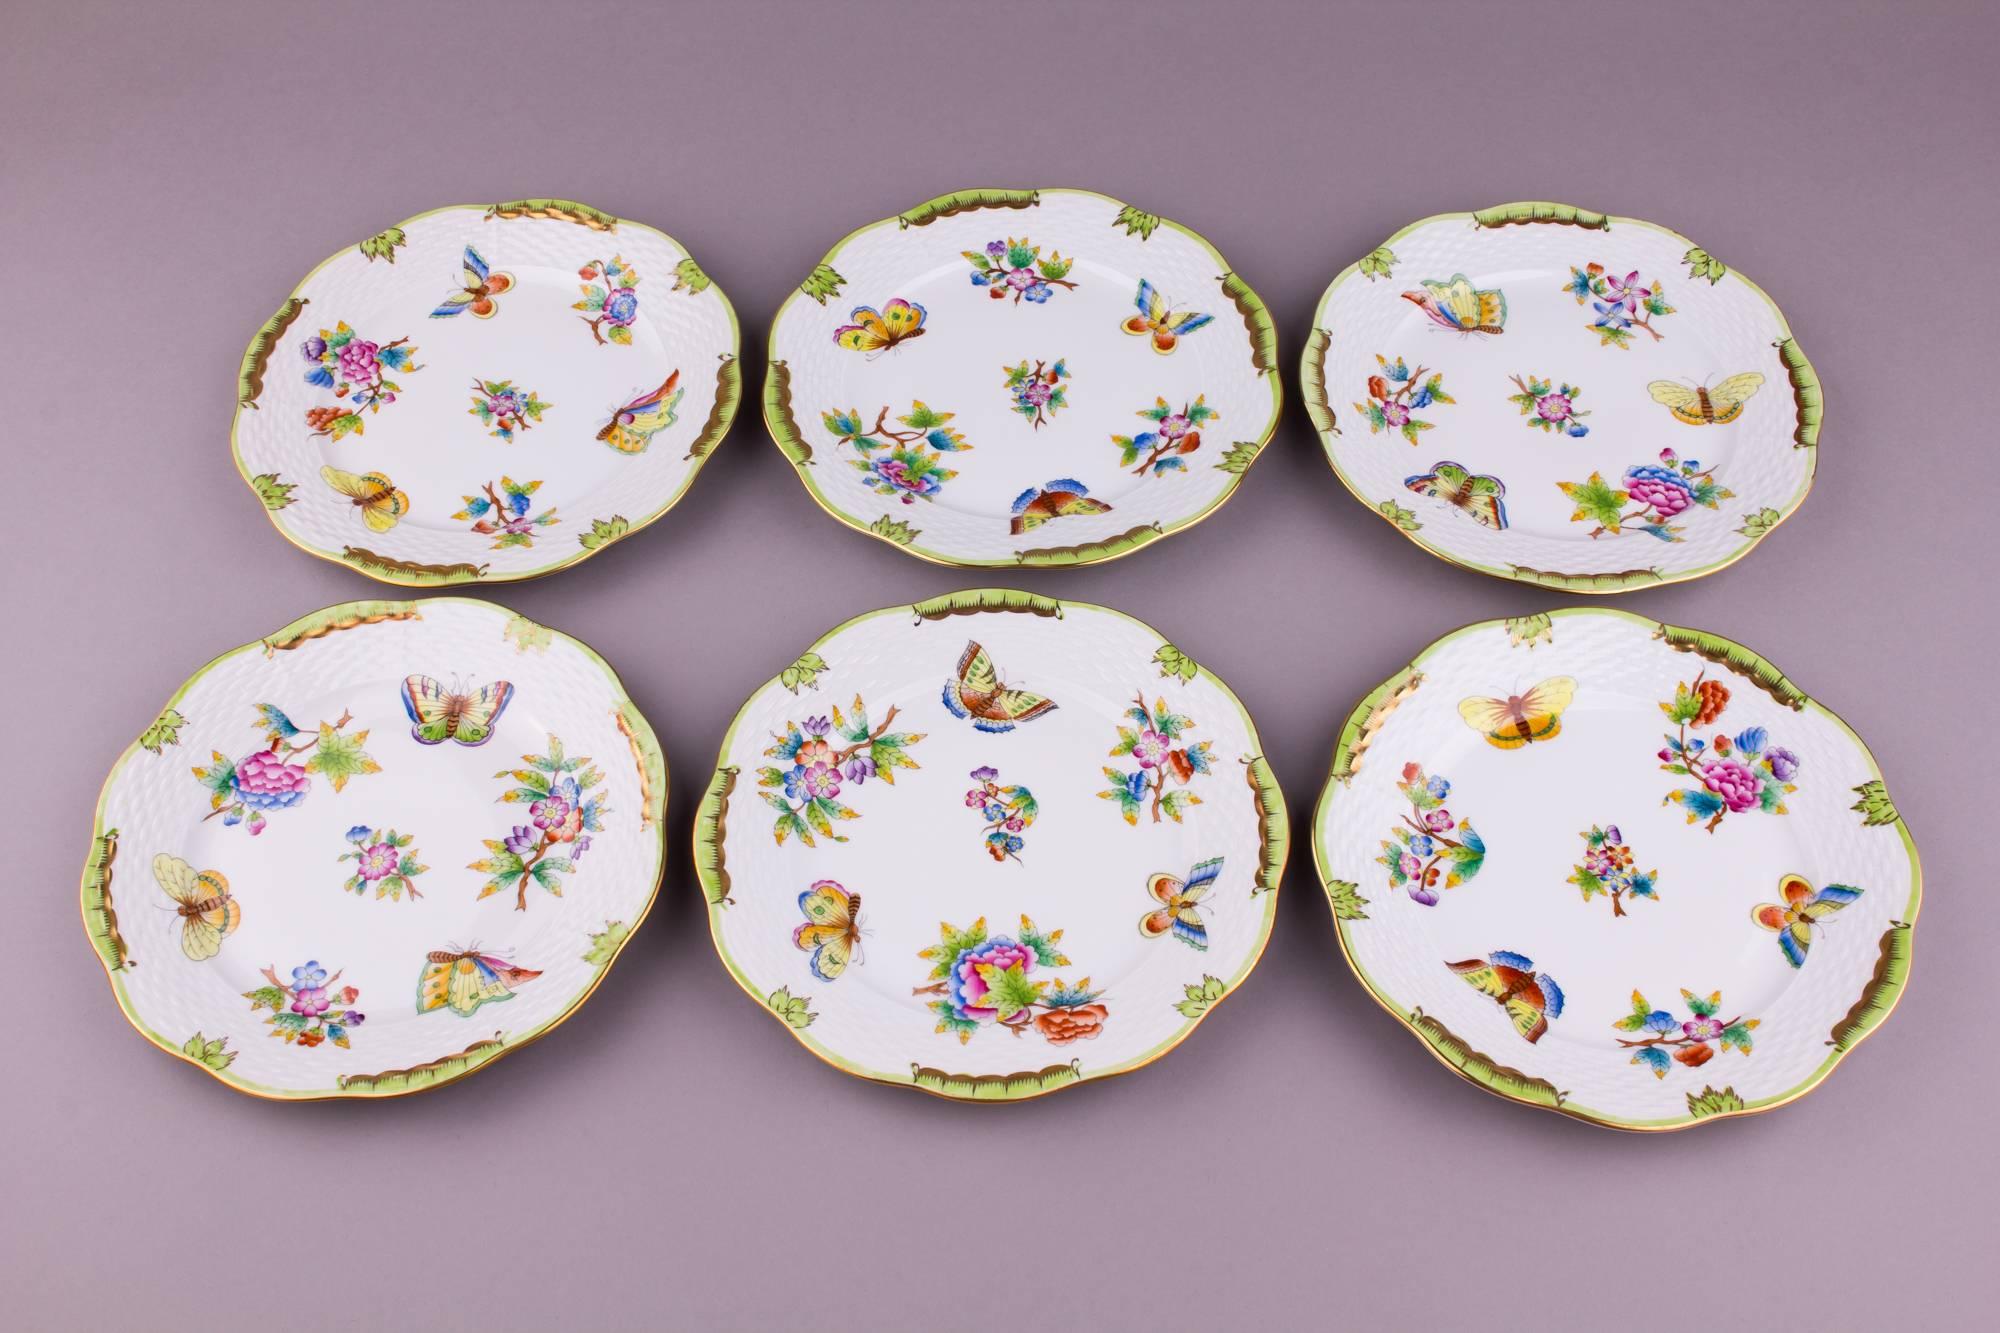 Mid-20th Century Herend Queen Victoria Plate Set for Six Persons, 18 Pieces For Sale